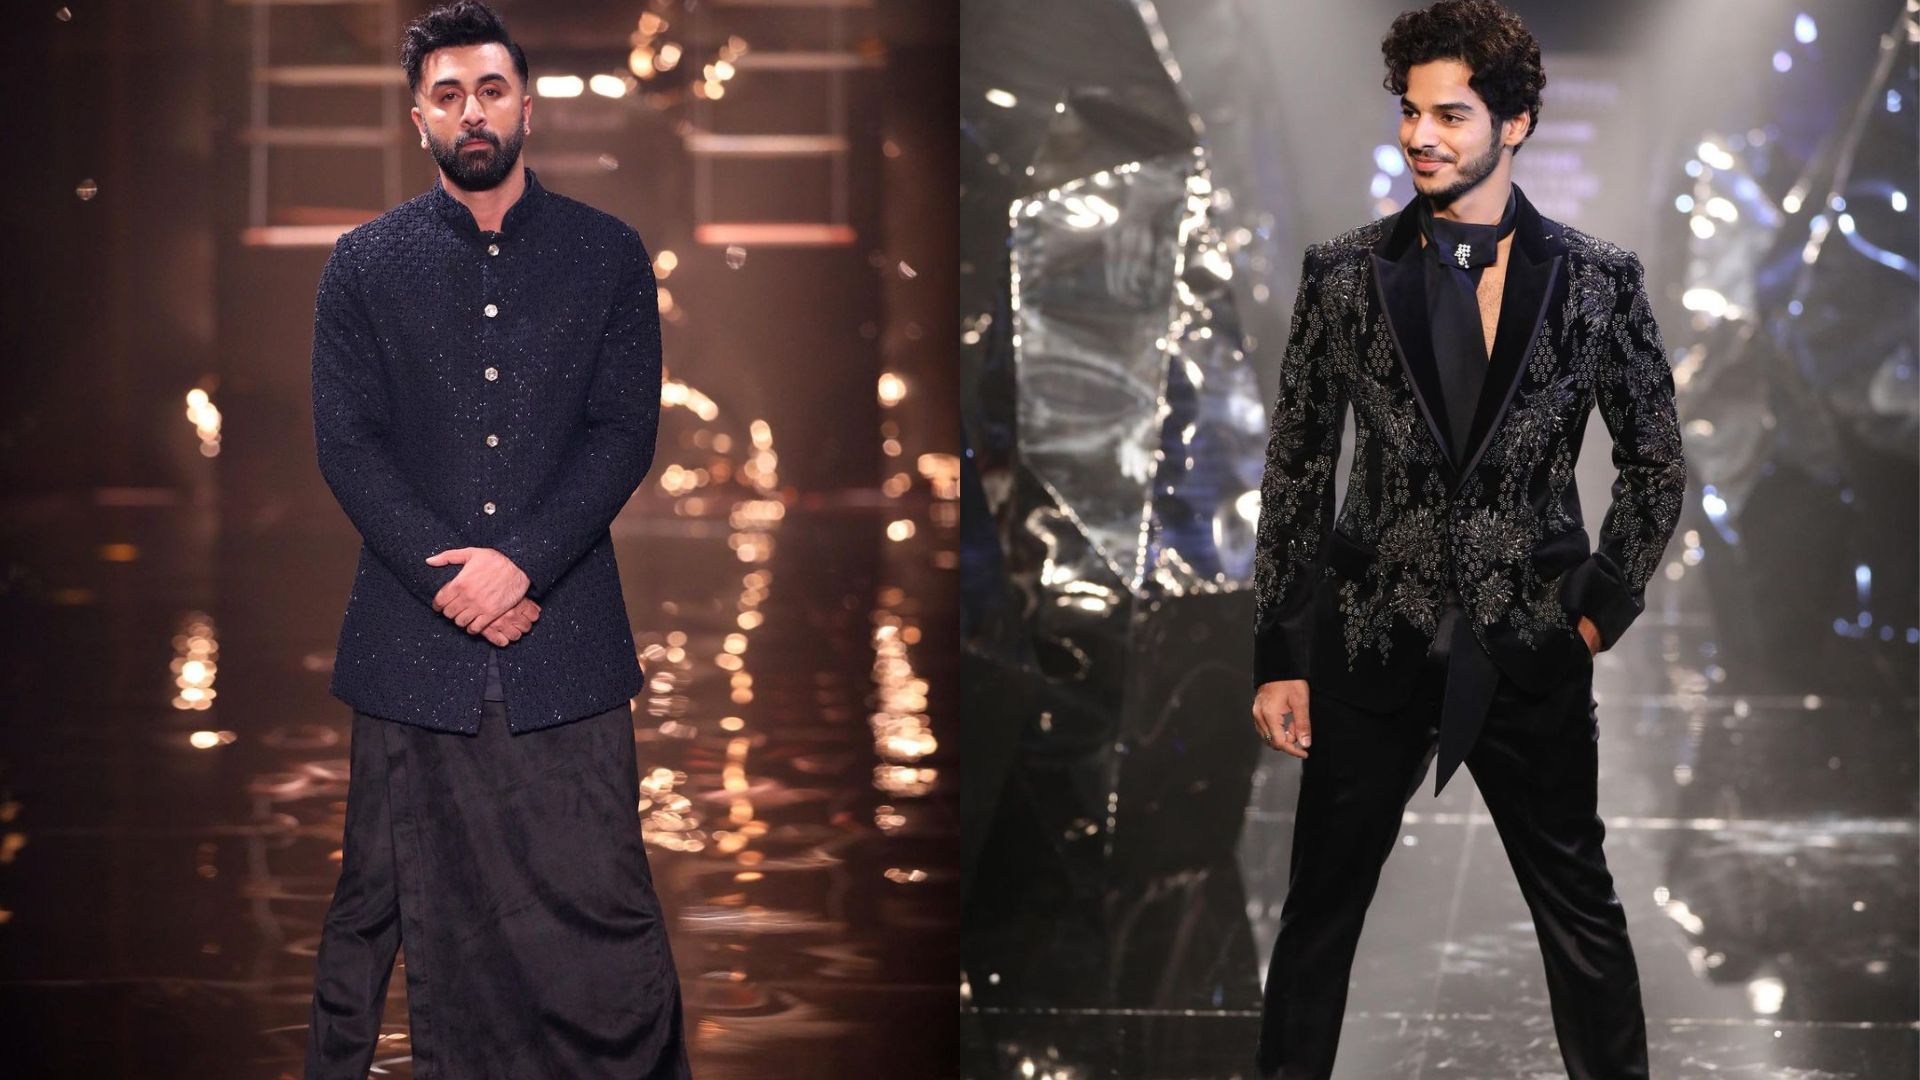 The summer man: India's top designers on contemporary men's fashion